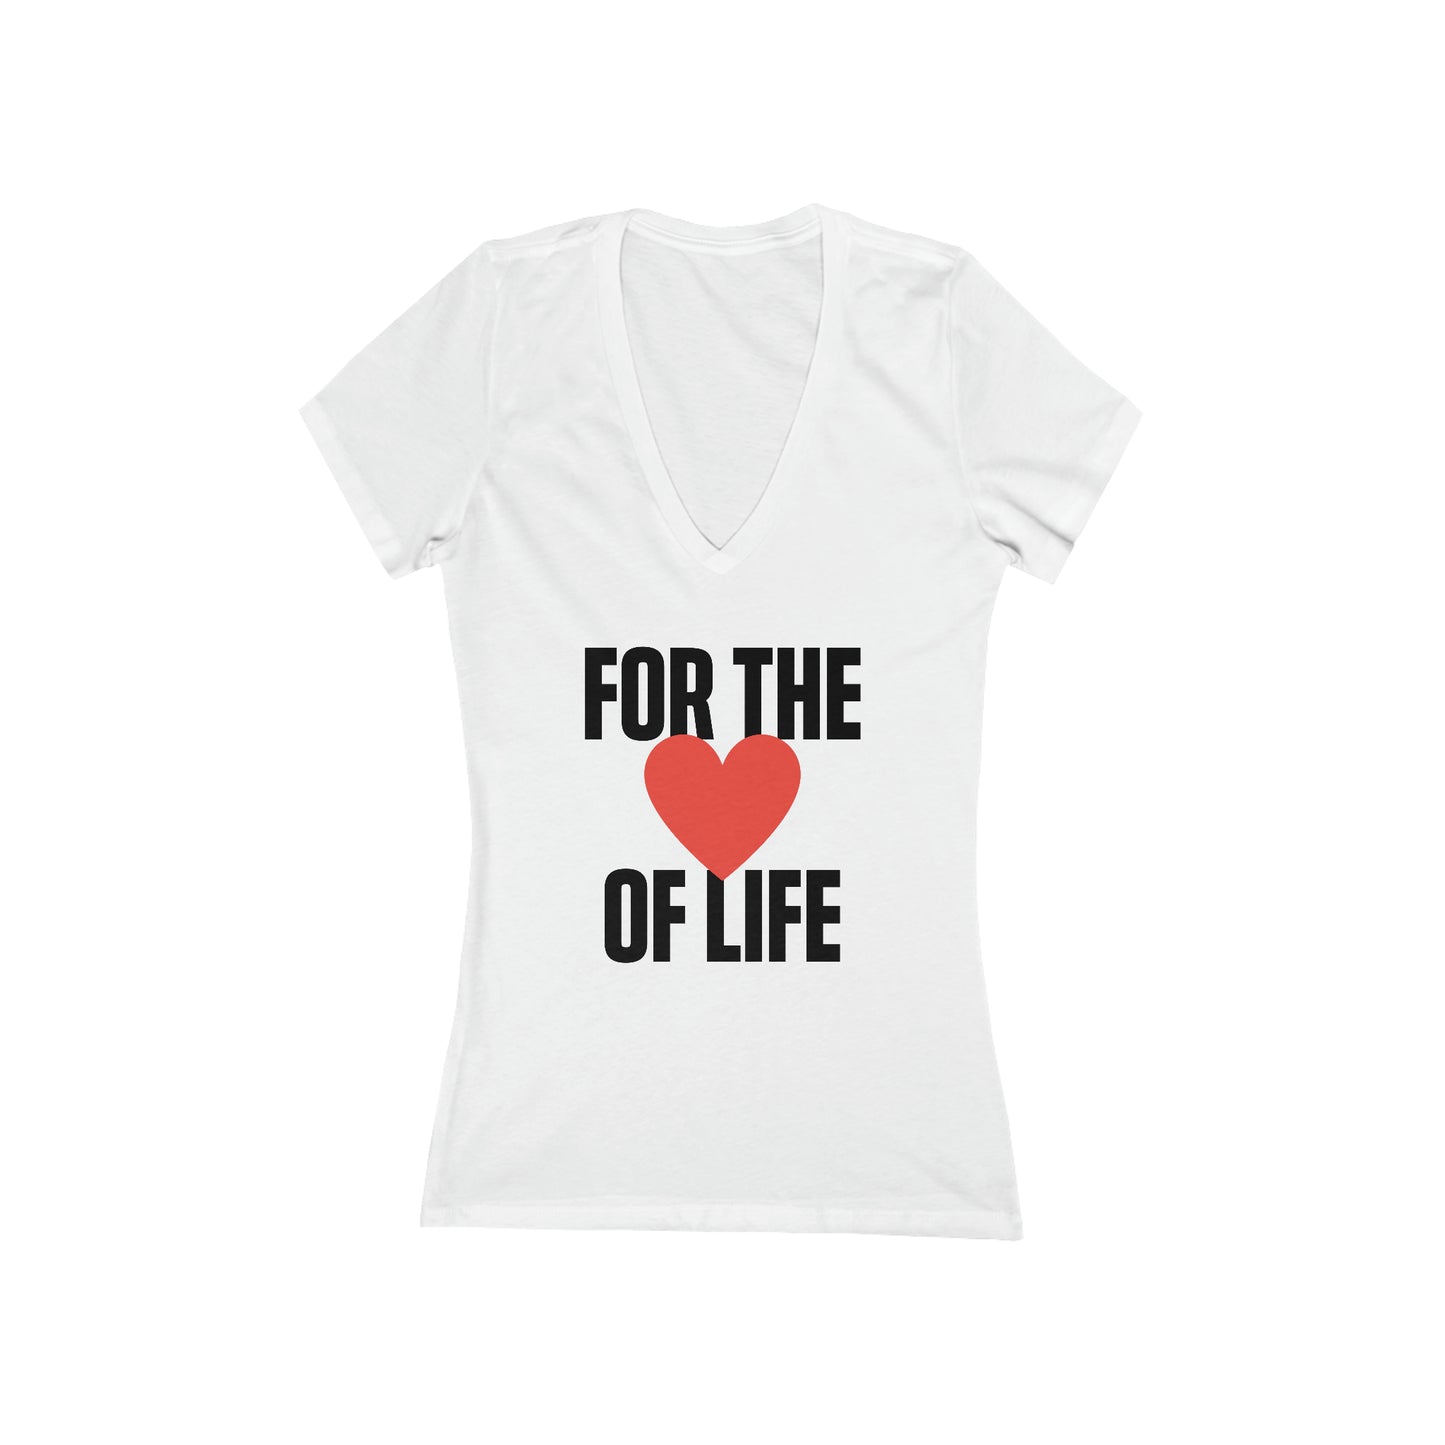 FOR THE LOVE OF LIFE | Women's Deep V-Neck Tee